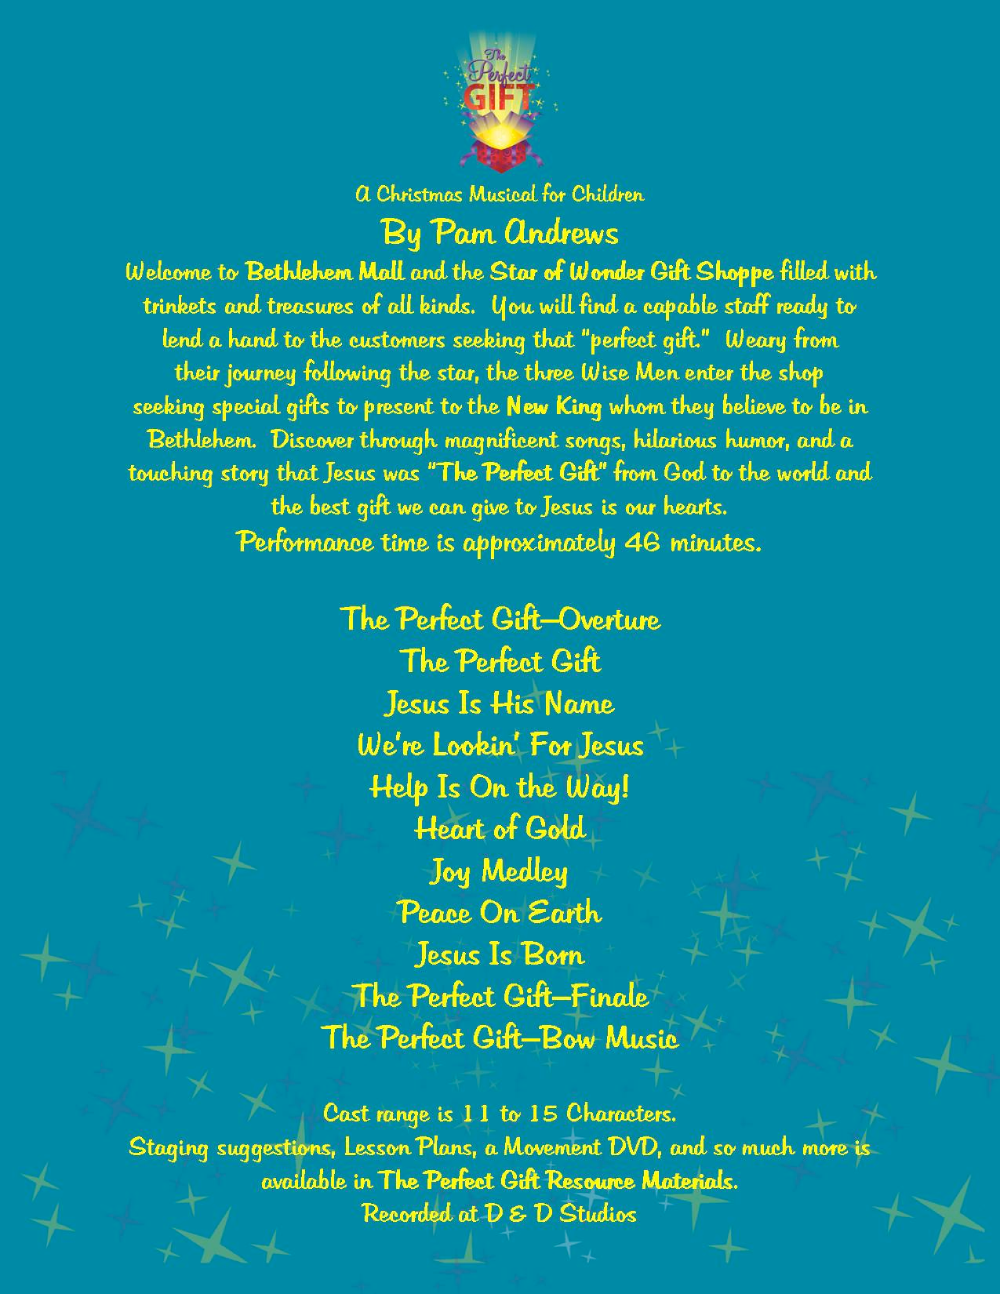 The Perfect Gift Kid's Scores/Lyric Sheets pdf